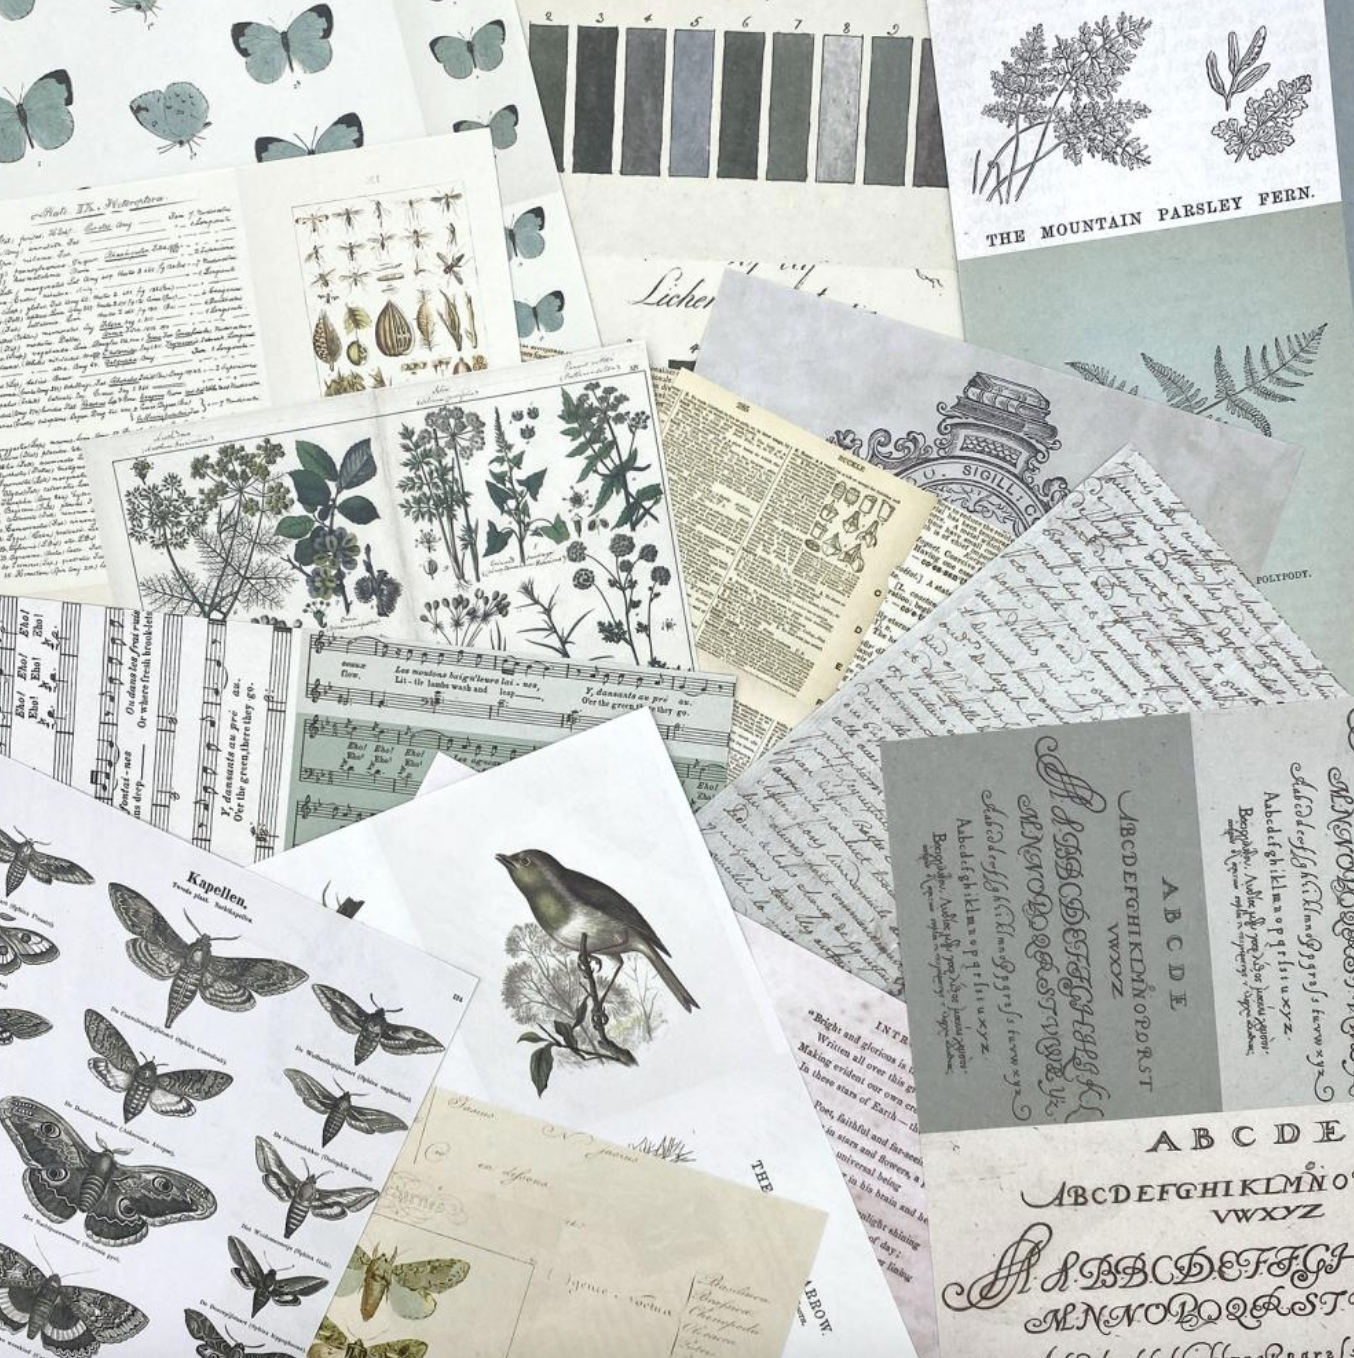 Collage Sheets - 6x8 - Color Swatch - Eucalyptus - 49 and Market - 40 Sheets